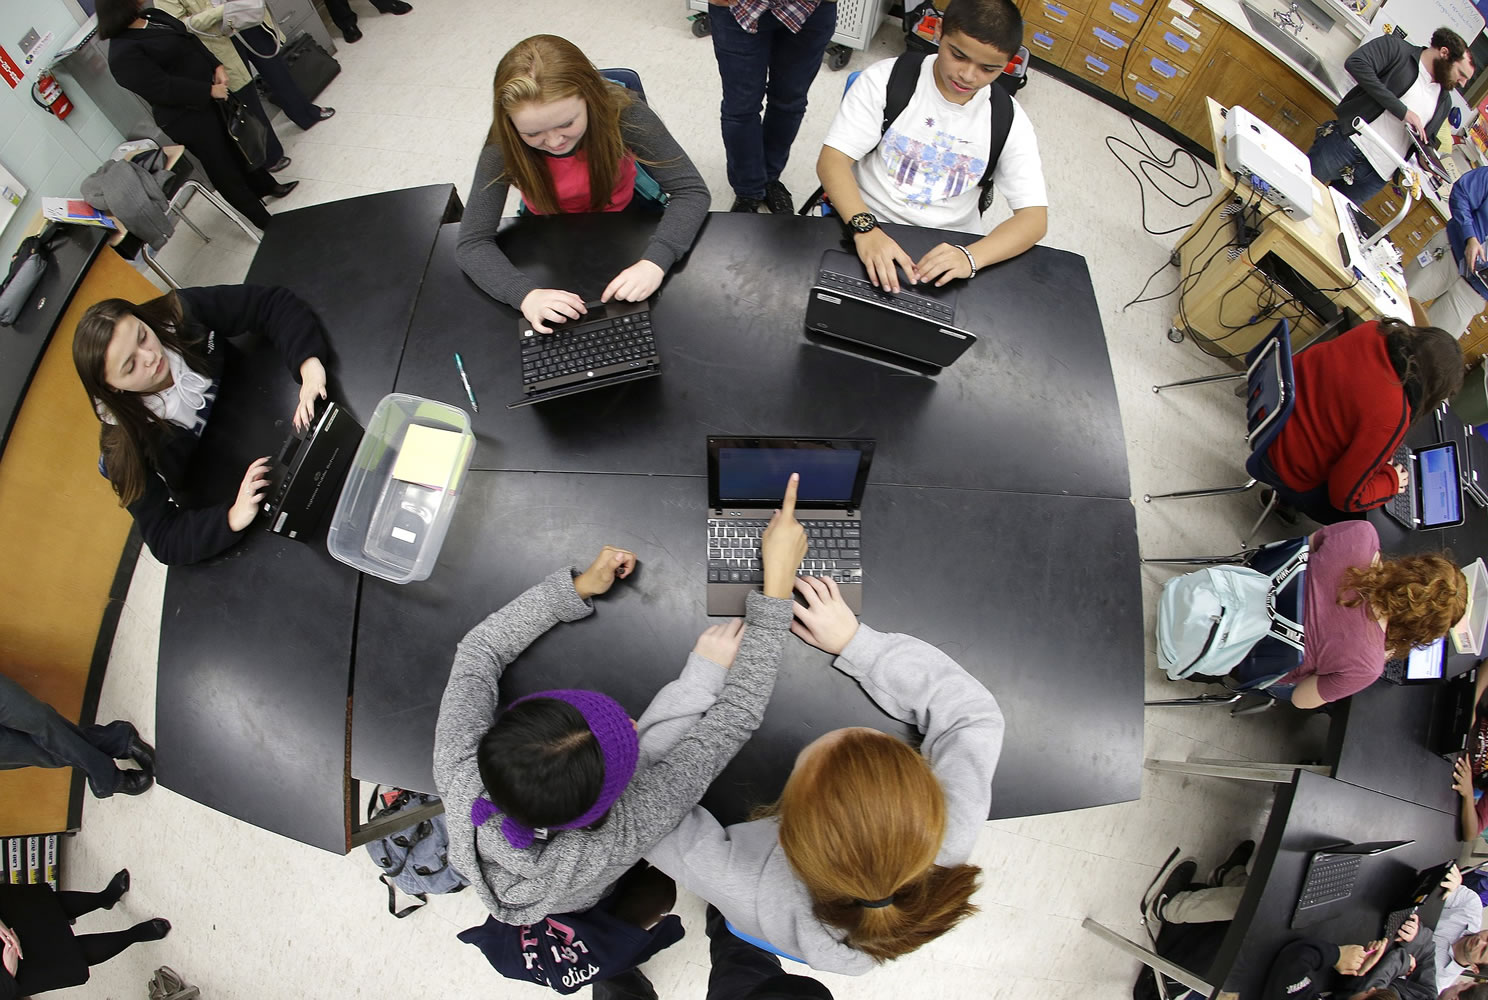 Students at Pacific Middle School in Des Moines work on laptop computers Dec. 9 as they take part in the international Hour of Code project.